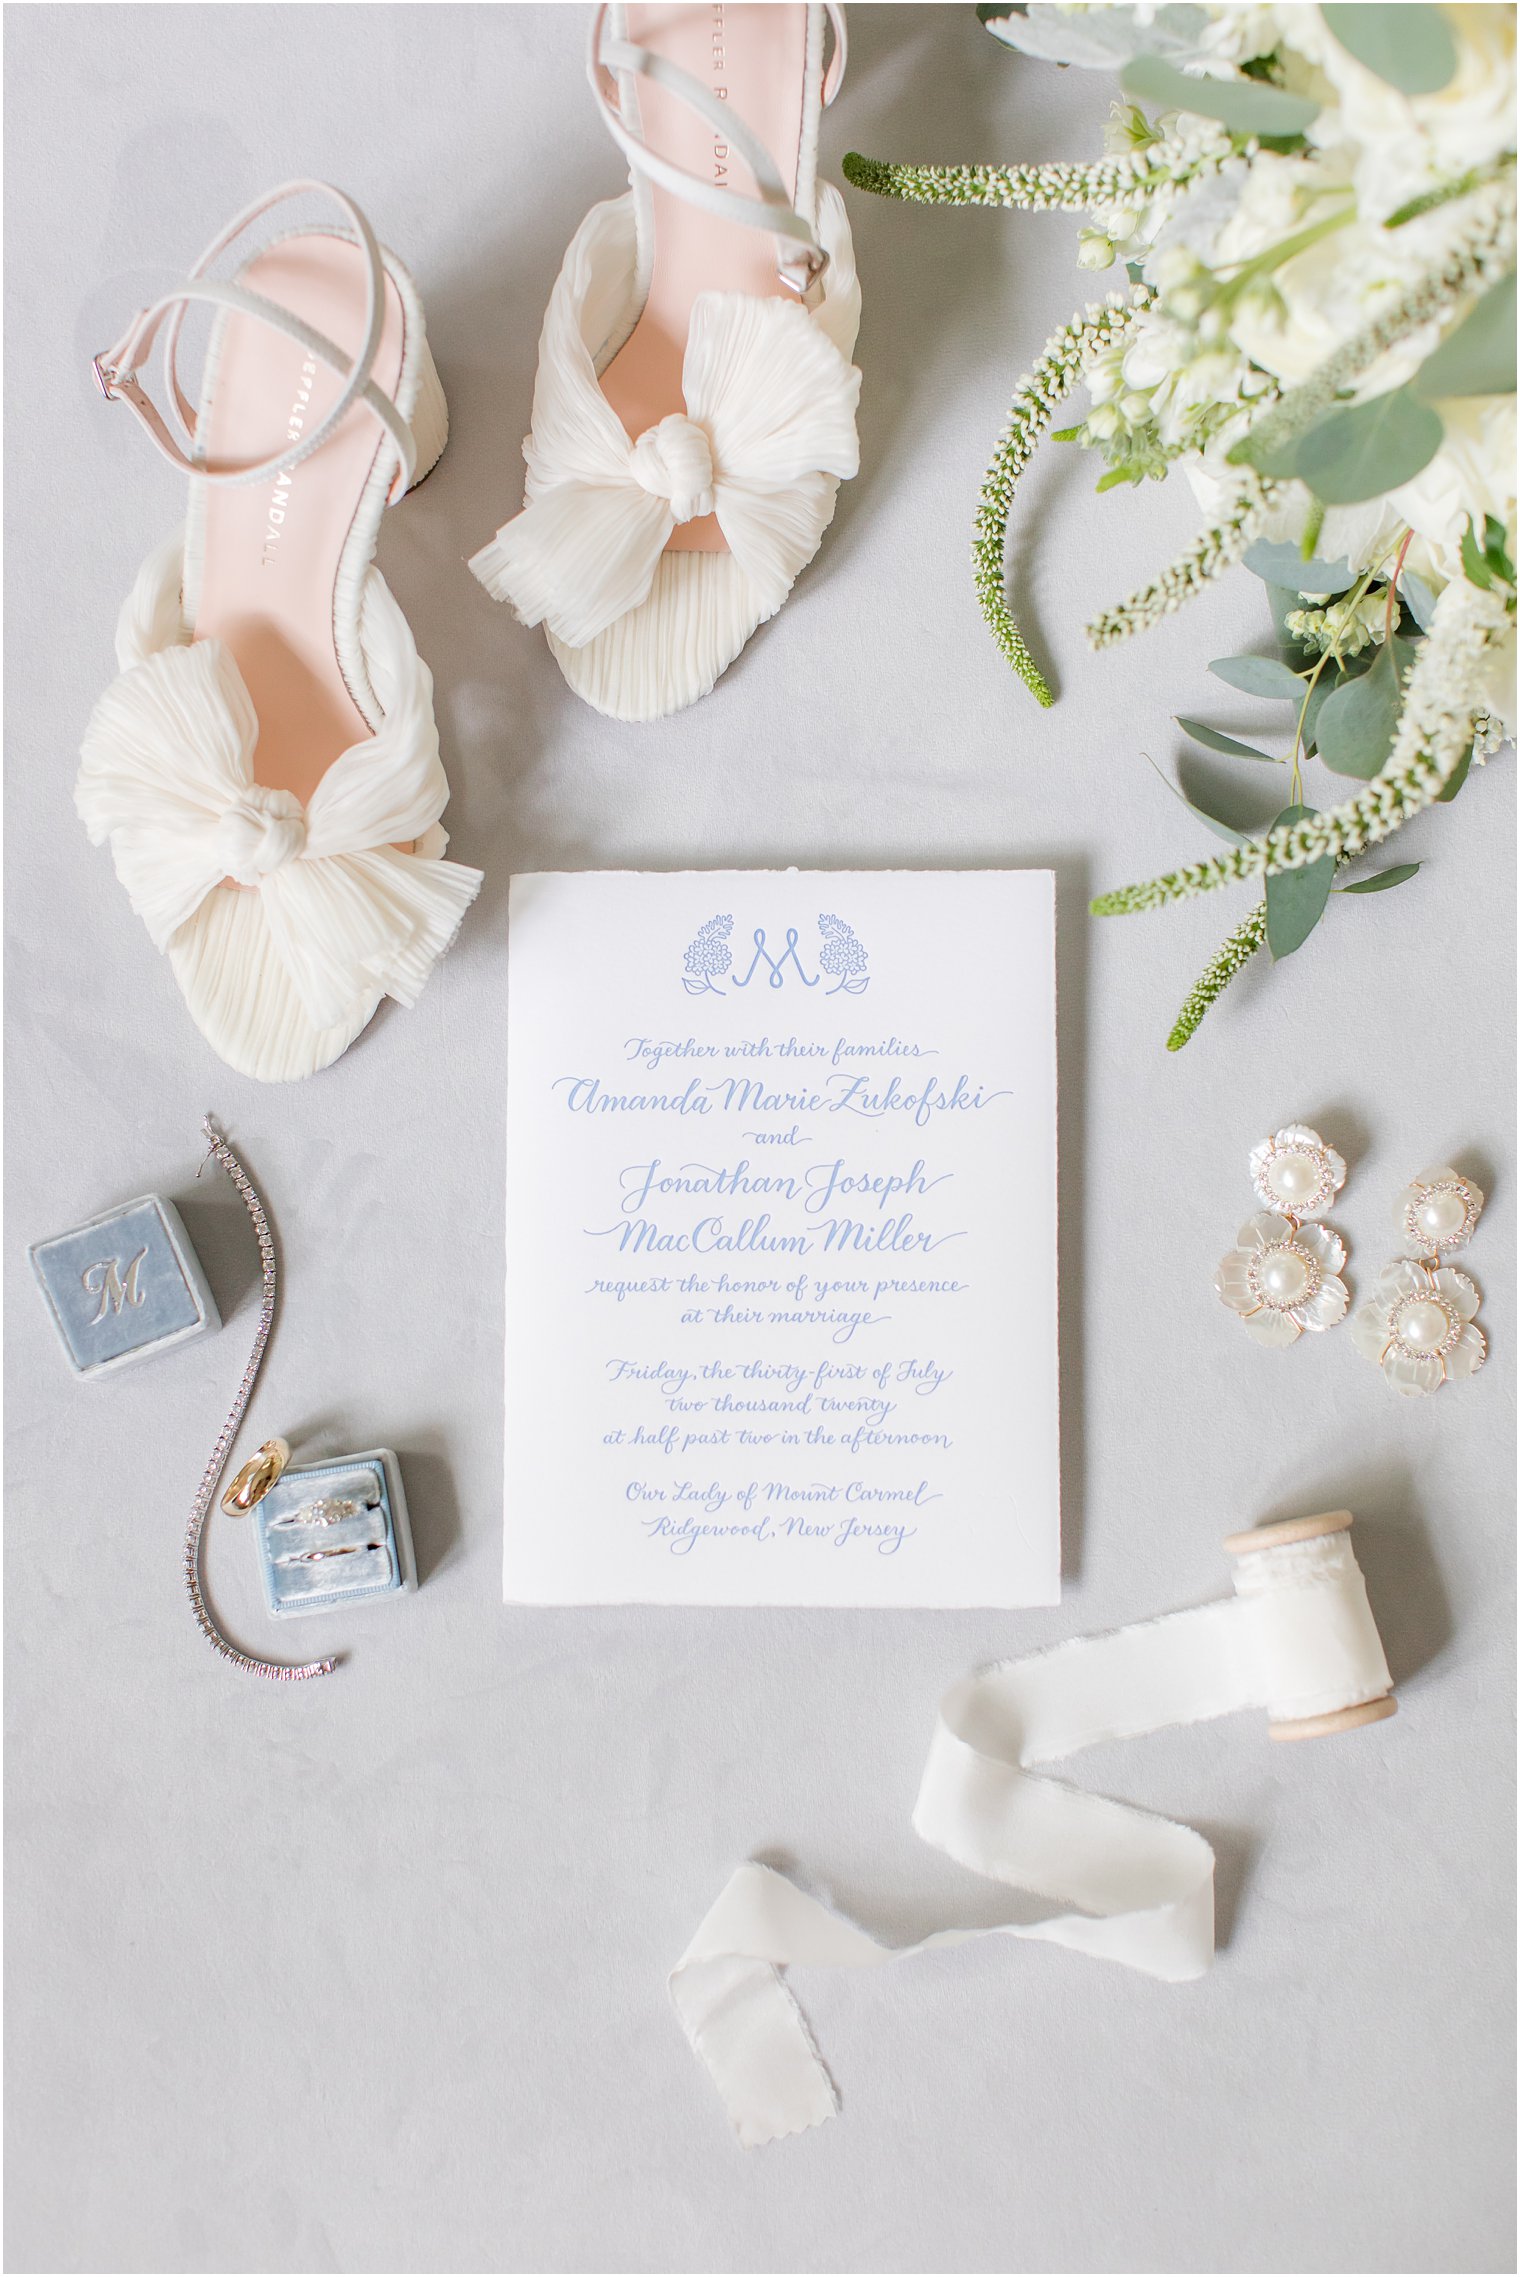 Letterpress invitations with blue writing